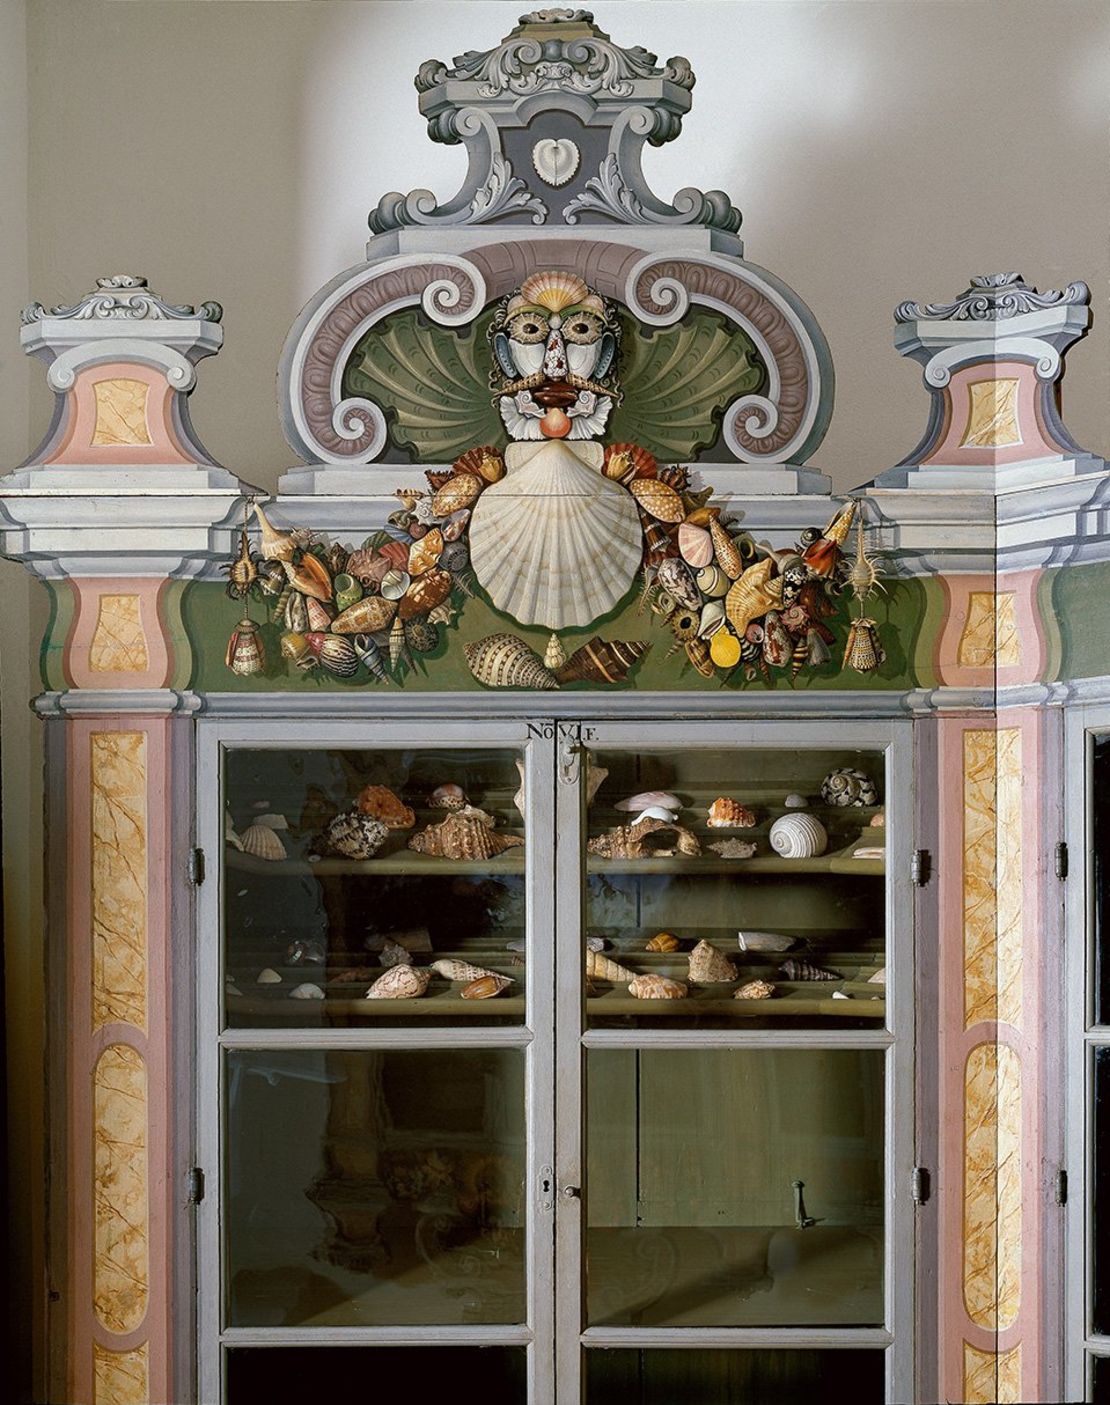 Pediment with a mask in the style of Giuseppe Arcimboldo (c. 1730s). Halle, Francke Foundations Chamber of Art and Natural History.